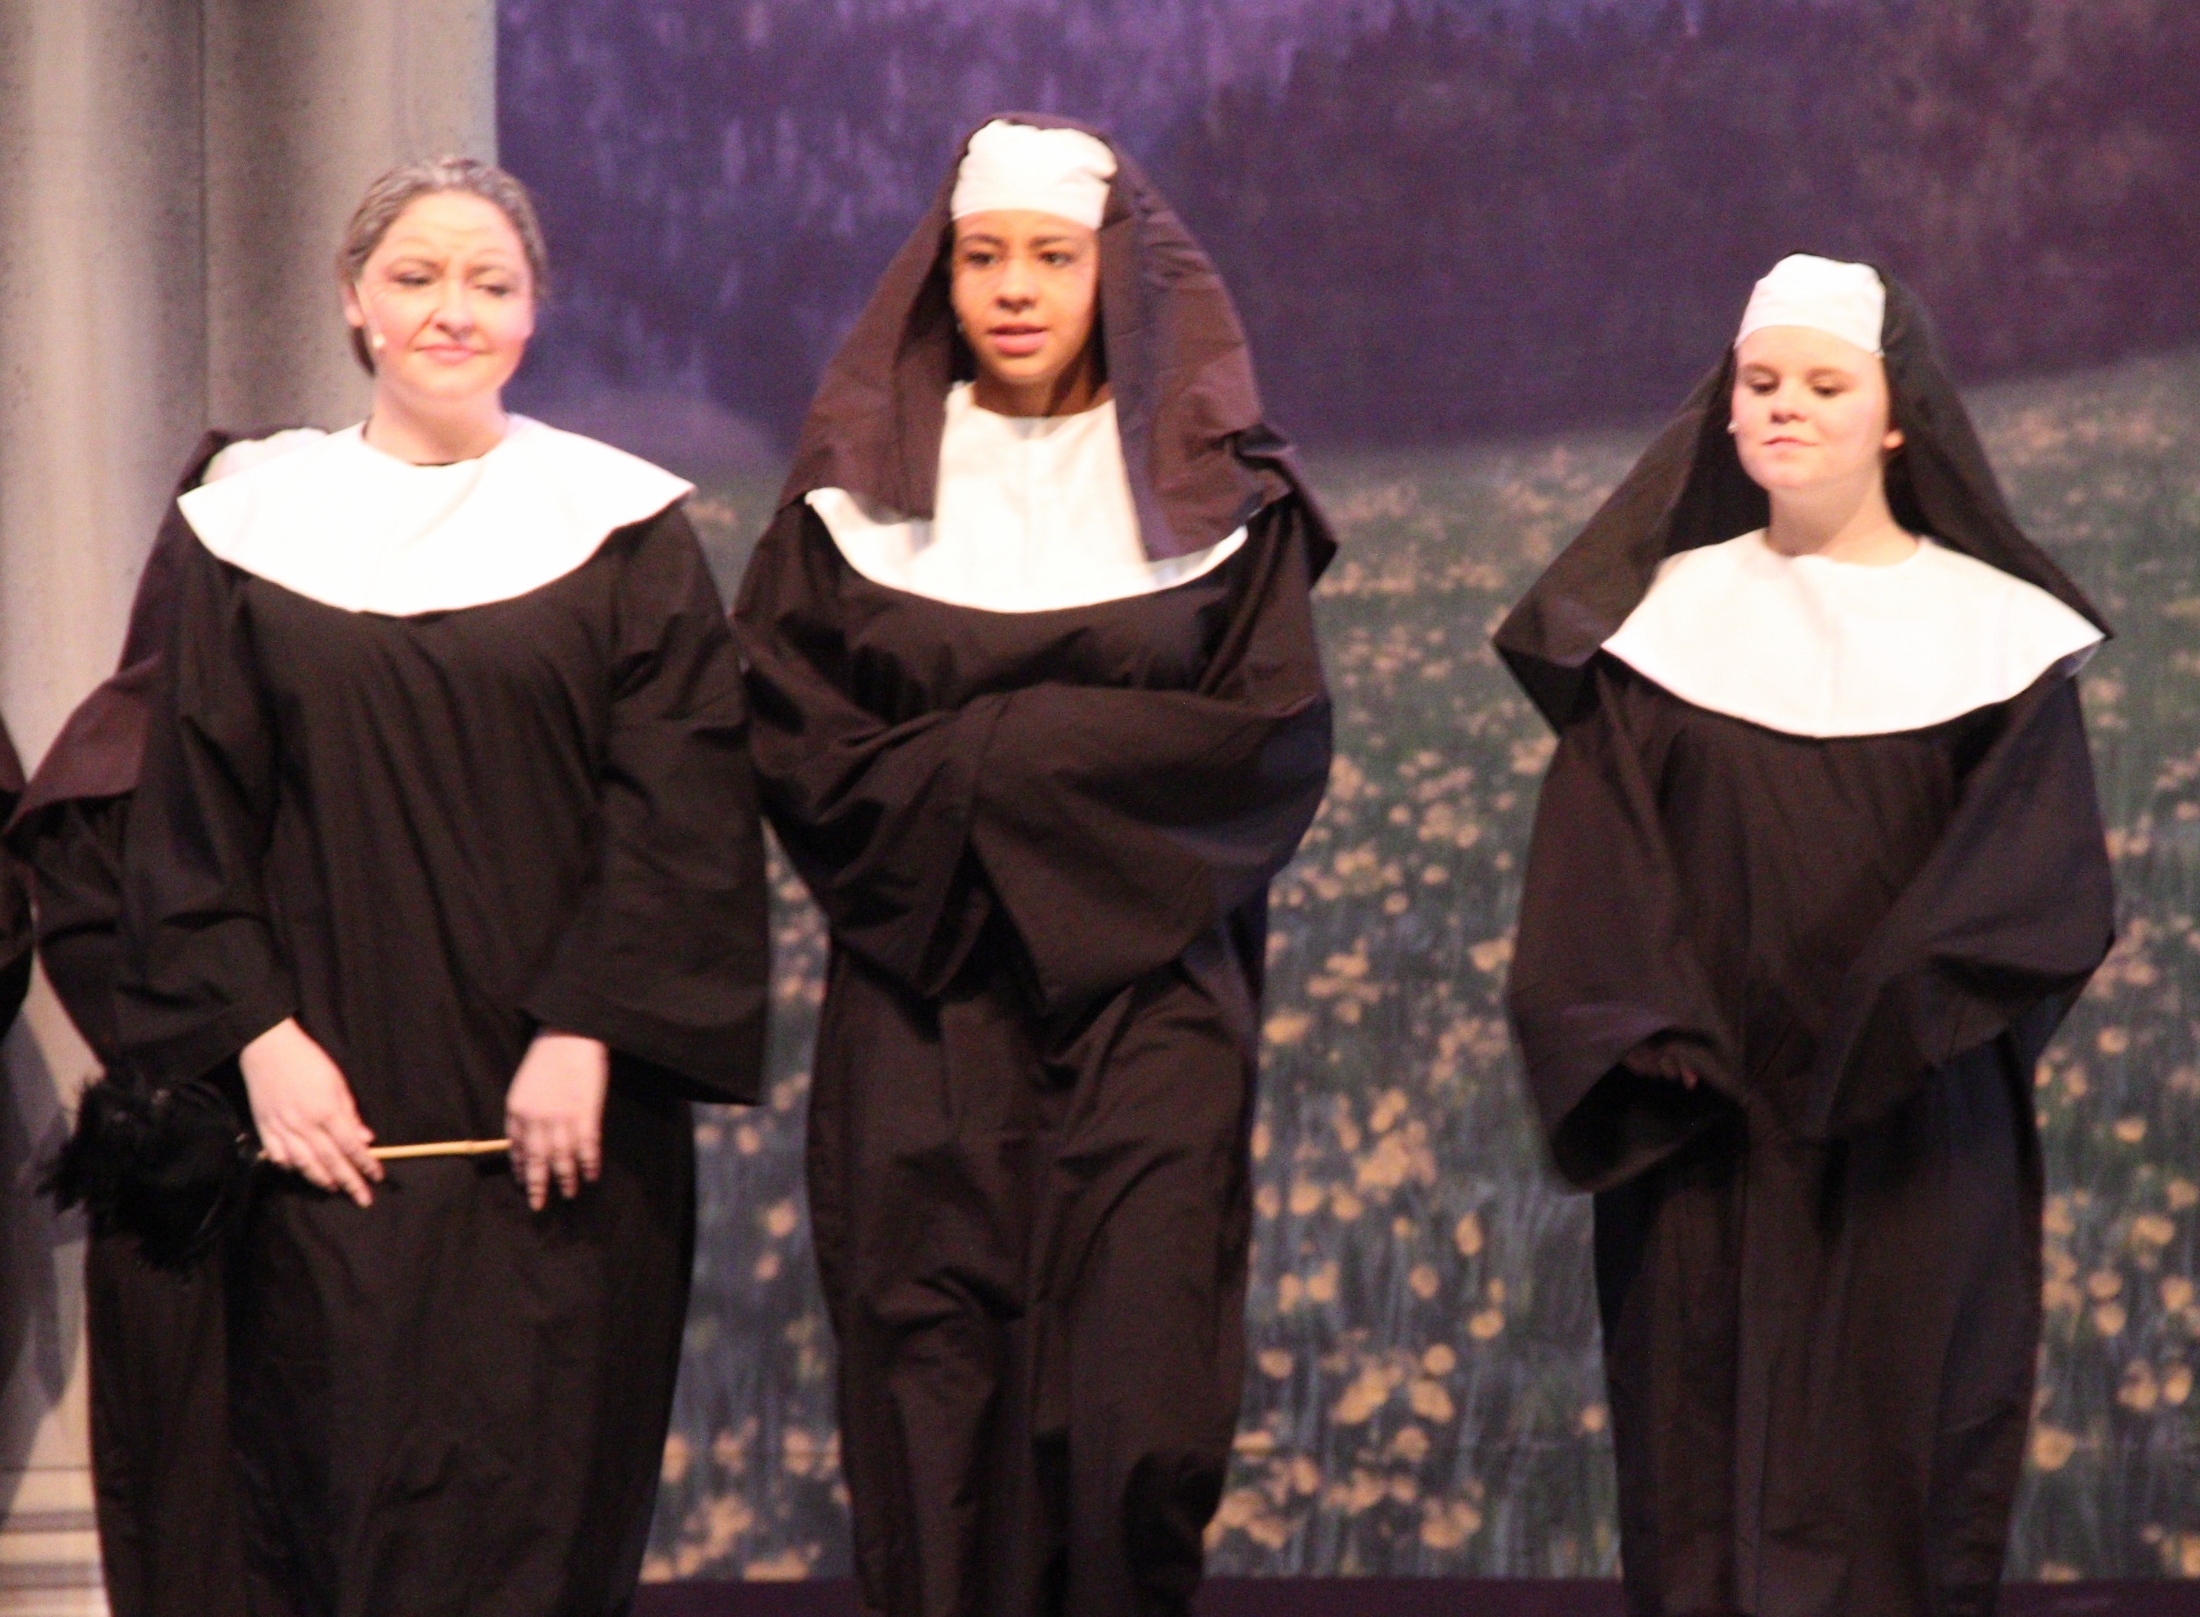 three women wearing nun outfits standing side by side